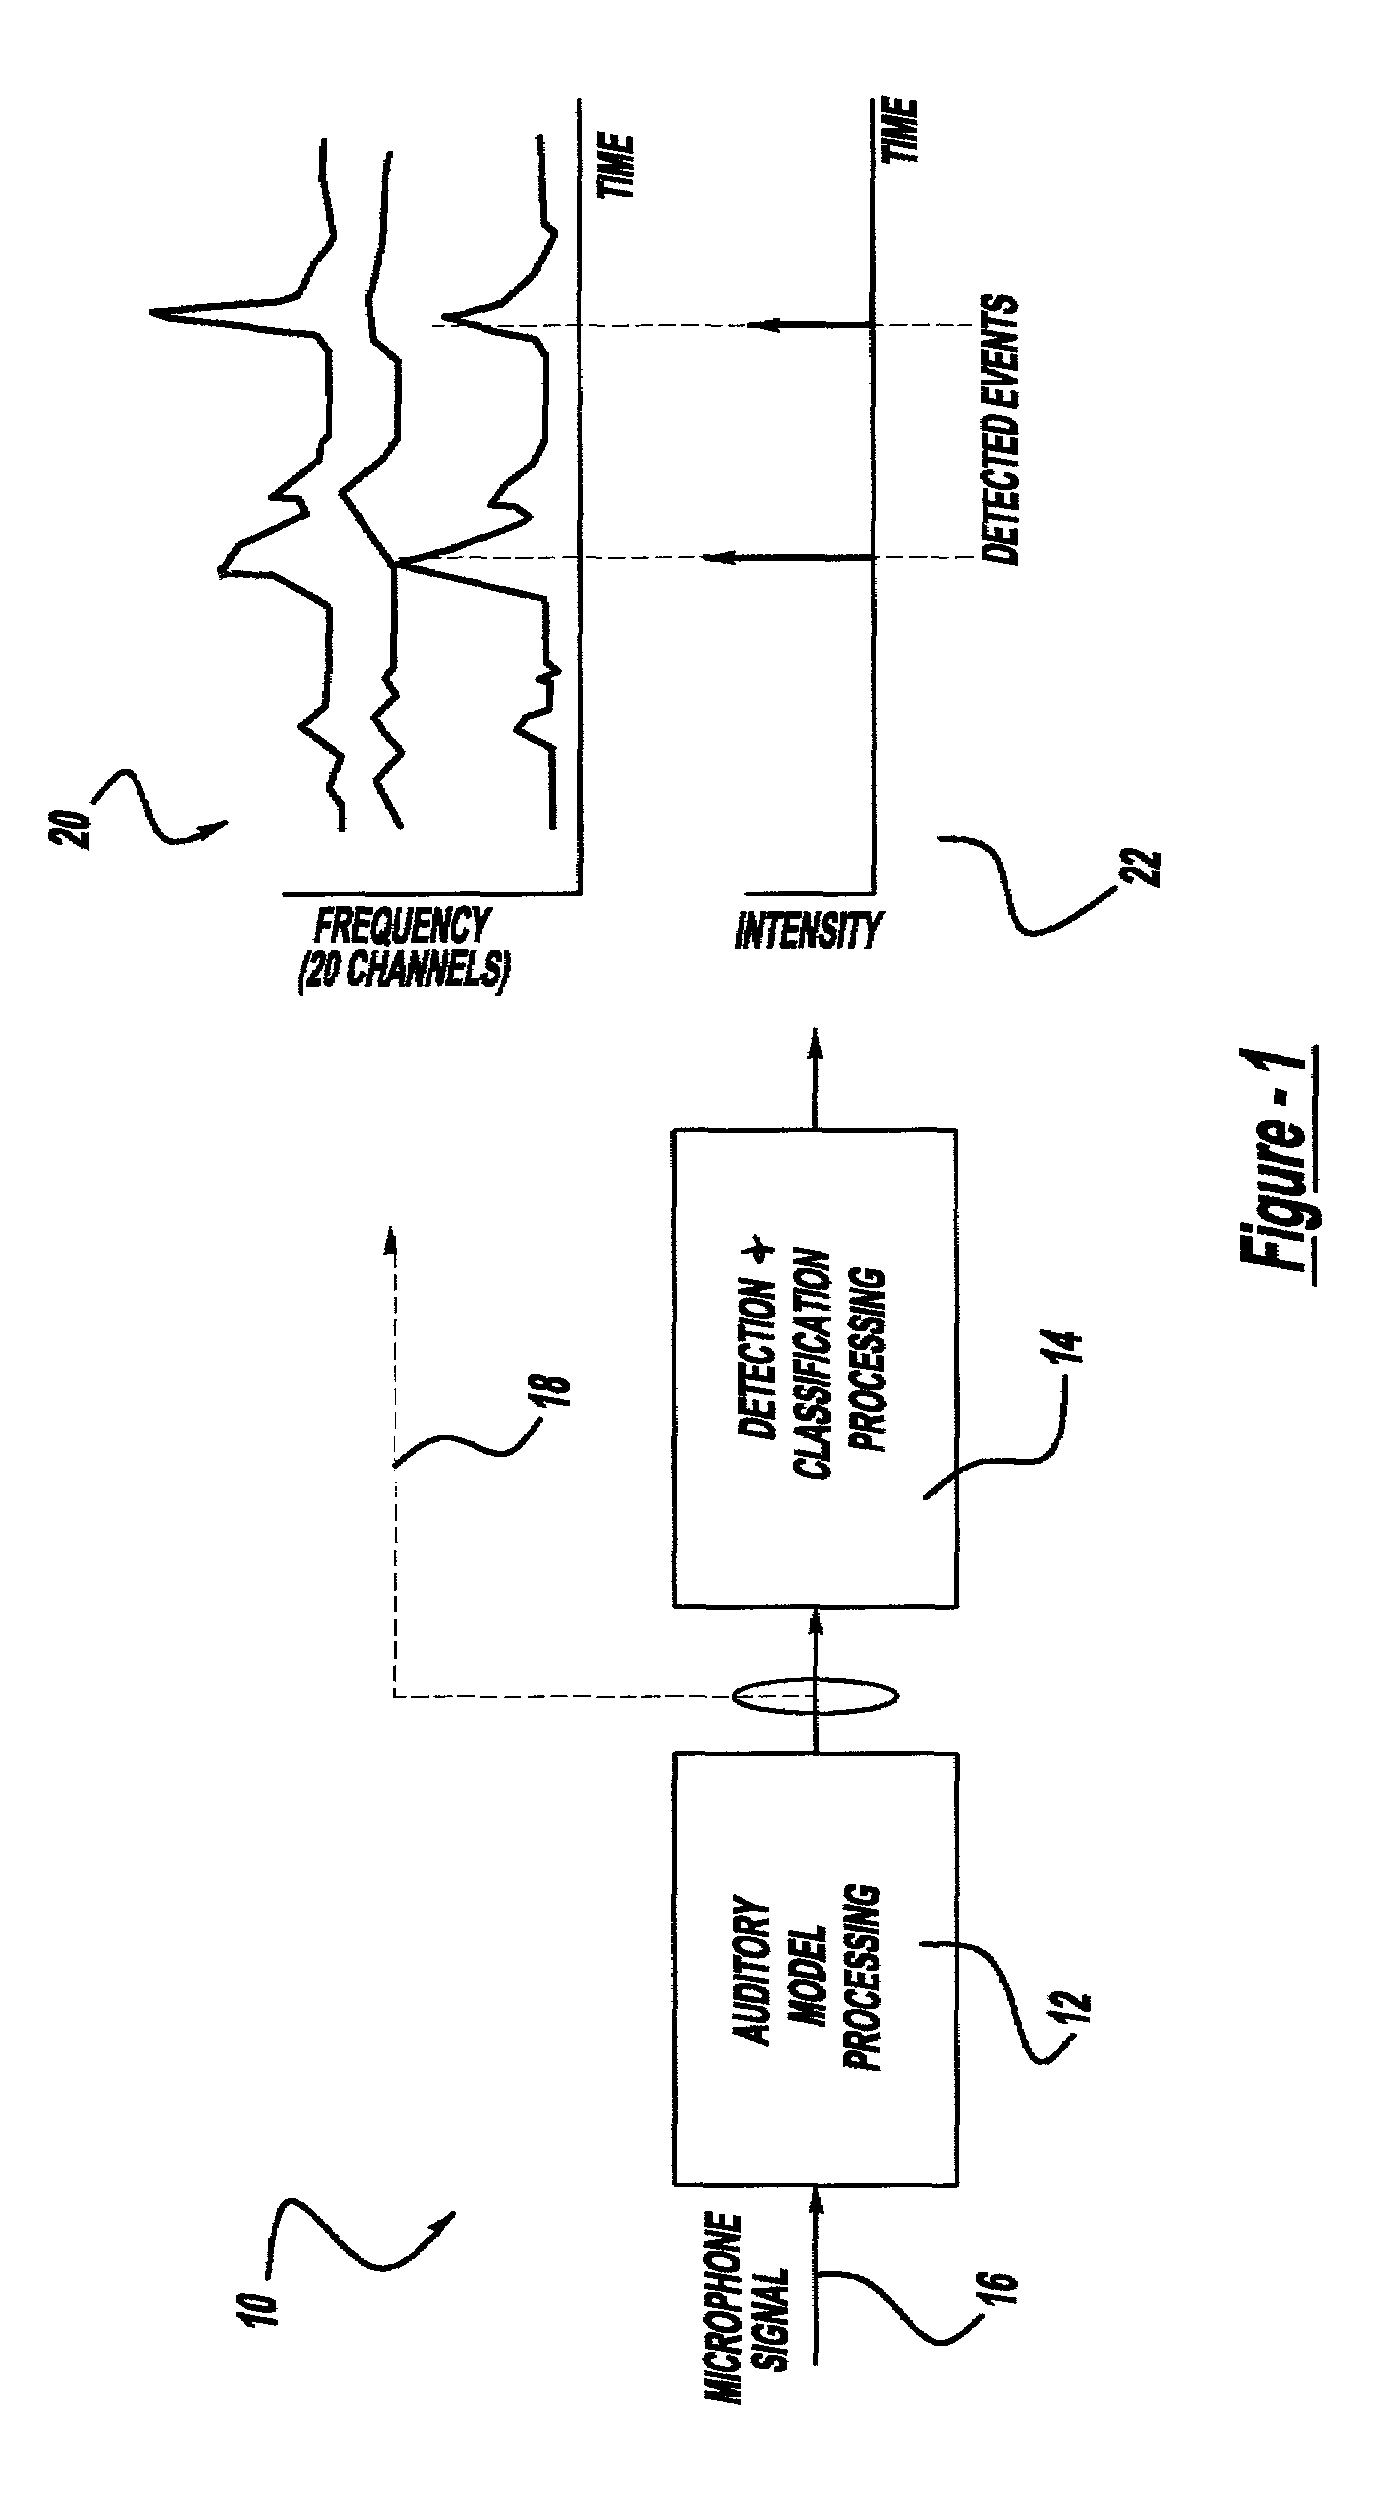 Method and implementation for detecting and characterizing audible transients in noise